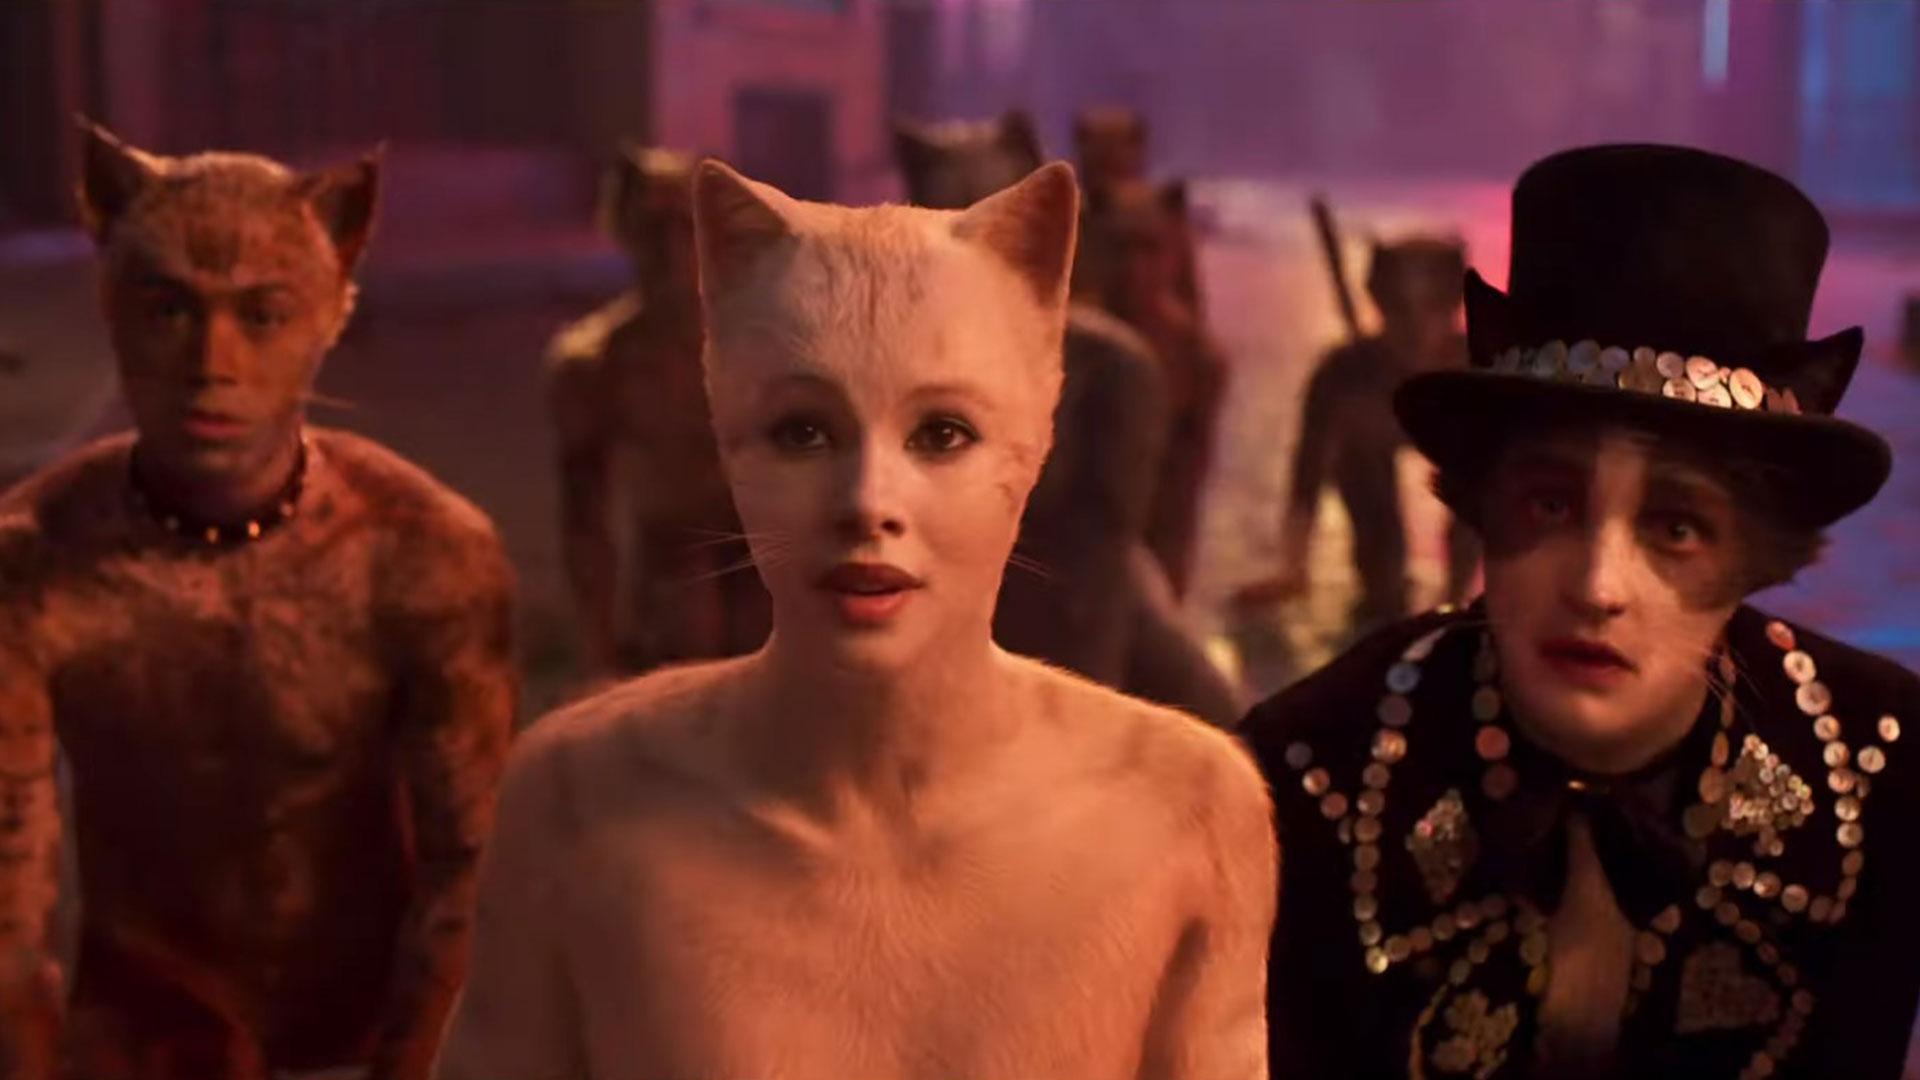 The Cats movie adaptation trailer has arrived, and it's as weird